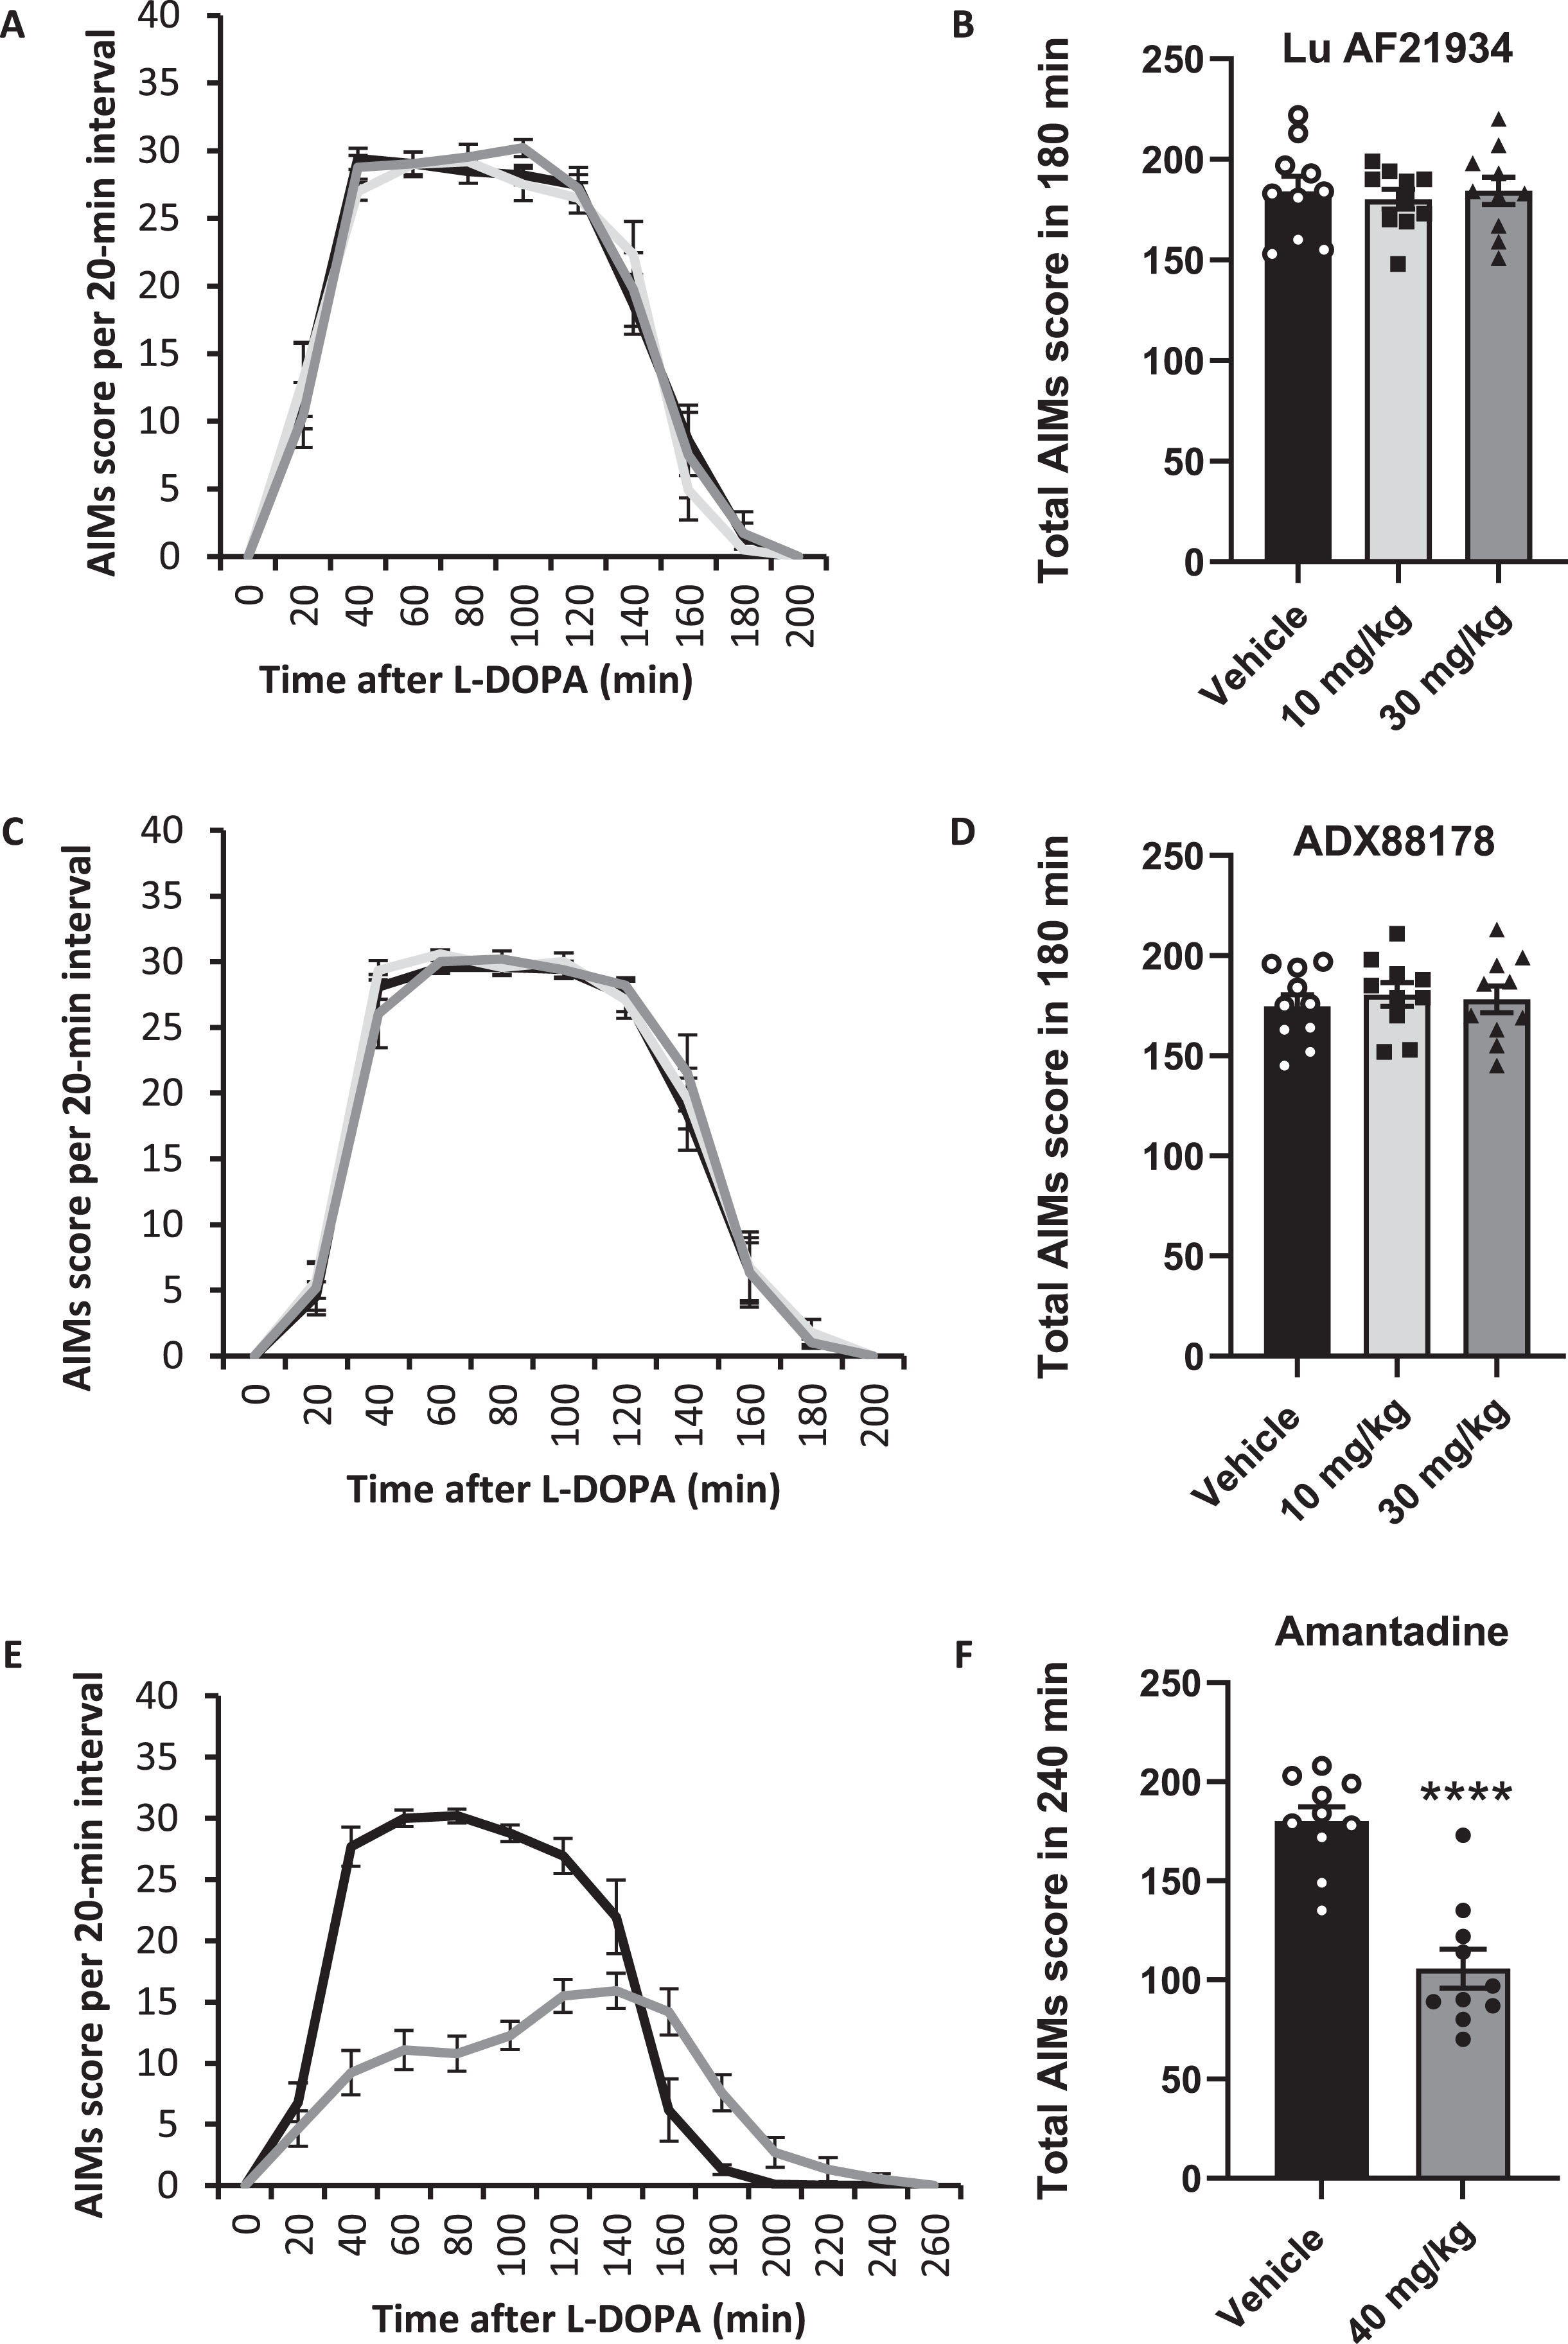 Positive allosteric modulators of metabotropic glutamate receptor 4 fail to reverse established abnormal involuntary movements (AIMs) in the 6-OHDA-lesioned rat model of L-DOPA-induced dyskinesia. AIMs scores are shown for rats pre-treated 30 min before L-DOPA (6.25 mg/kg + benserazide (15 mg/kg) s.c.) with Lu AF21934 (A,B), ADX88178 (C,D) or the positive control, amantadine (E,F). Left panels show total AIMs score per 20-min interval following pre-treatment with vehicle (black line), 10 mg/kg Lu AF21934 or ADX88178 (light grey line; A,C), 30 mg/kg Lu AF21934 or ADX88178 (dark grey line; A,C) or 40 mg/kg amantadine (dark grey line; E). Right panels show total AIMs score over 180 or 240 min post L-DOPA injection following 30-min pre-treatment with Lu AF21934 (B), ADX88178 (D), or amantadine (F). Data are displayed as mean±S.E.M. (n = 10), with individual data points displayed additionally in B, D, and F. There was no significant effect of either Lu AF21934 or ADX88178 on dyskinesia score (p > 0.05; one-way RM ANOVA with a Dunnett’s post-hoc test). ****p < 0.0001; paired t-test.